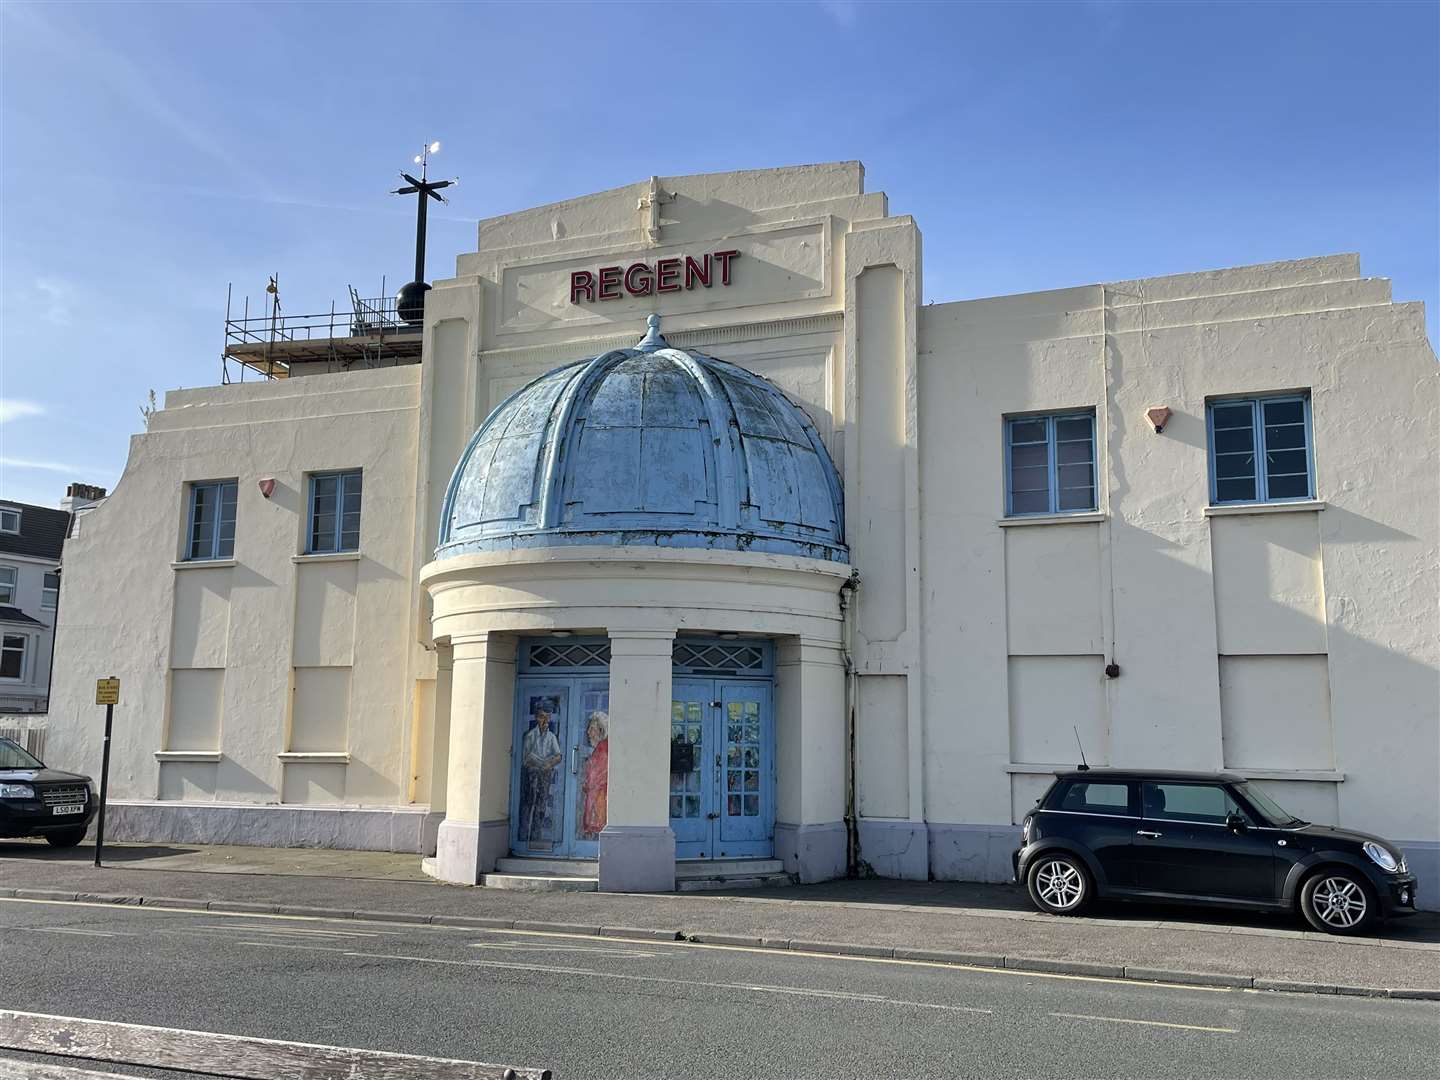 The Halloween protest will be held outside The Regent in Deal